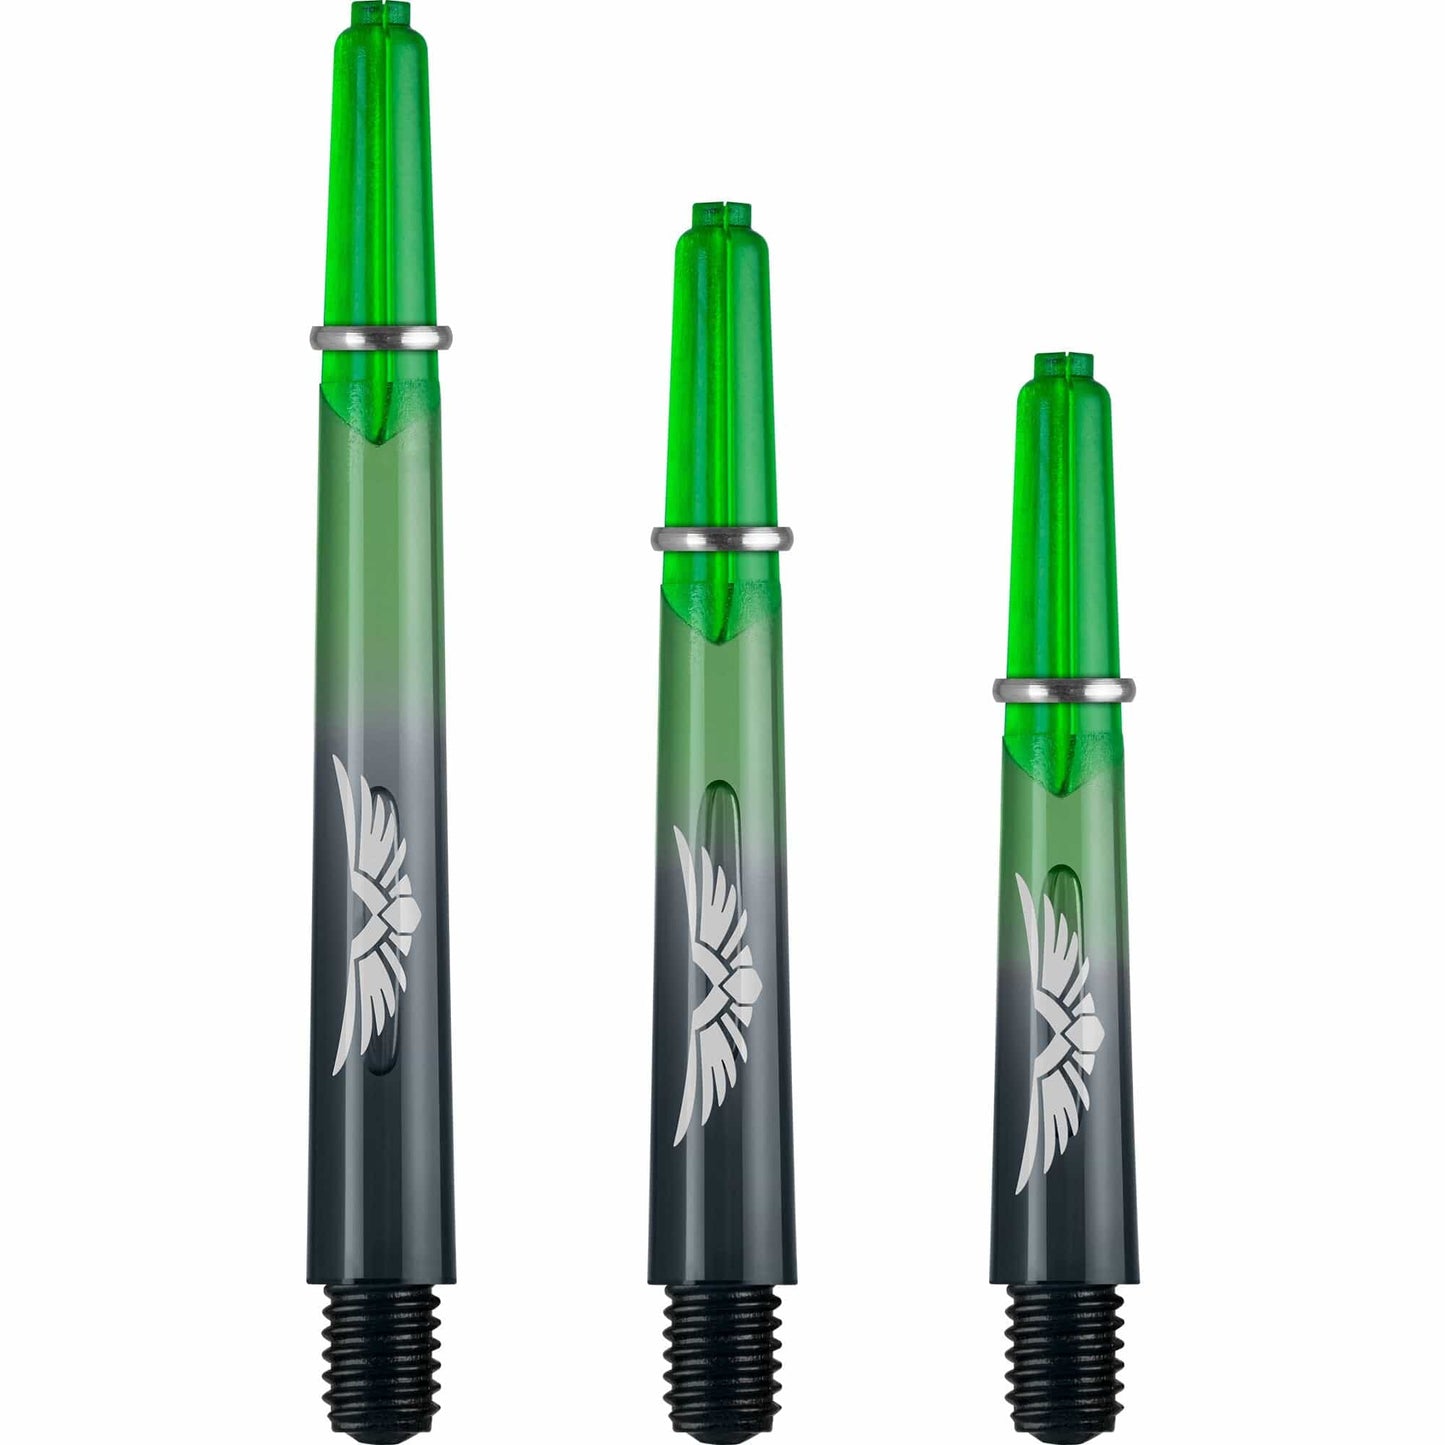 Shot Eagle Claw Dart Shafts - with Machined Rings - Strong Polycarbonate Stems - Black Green